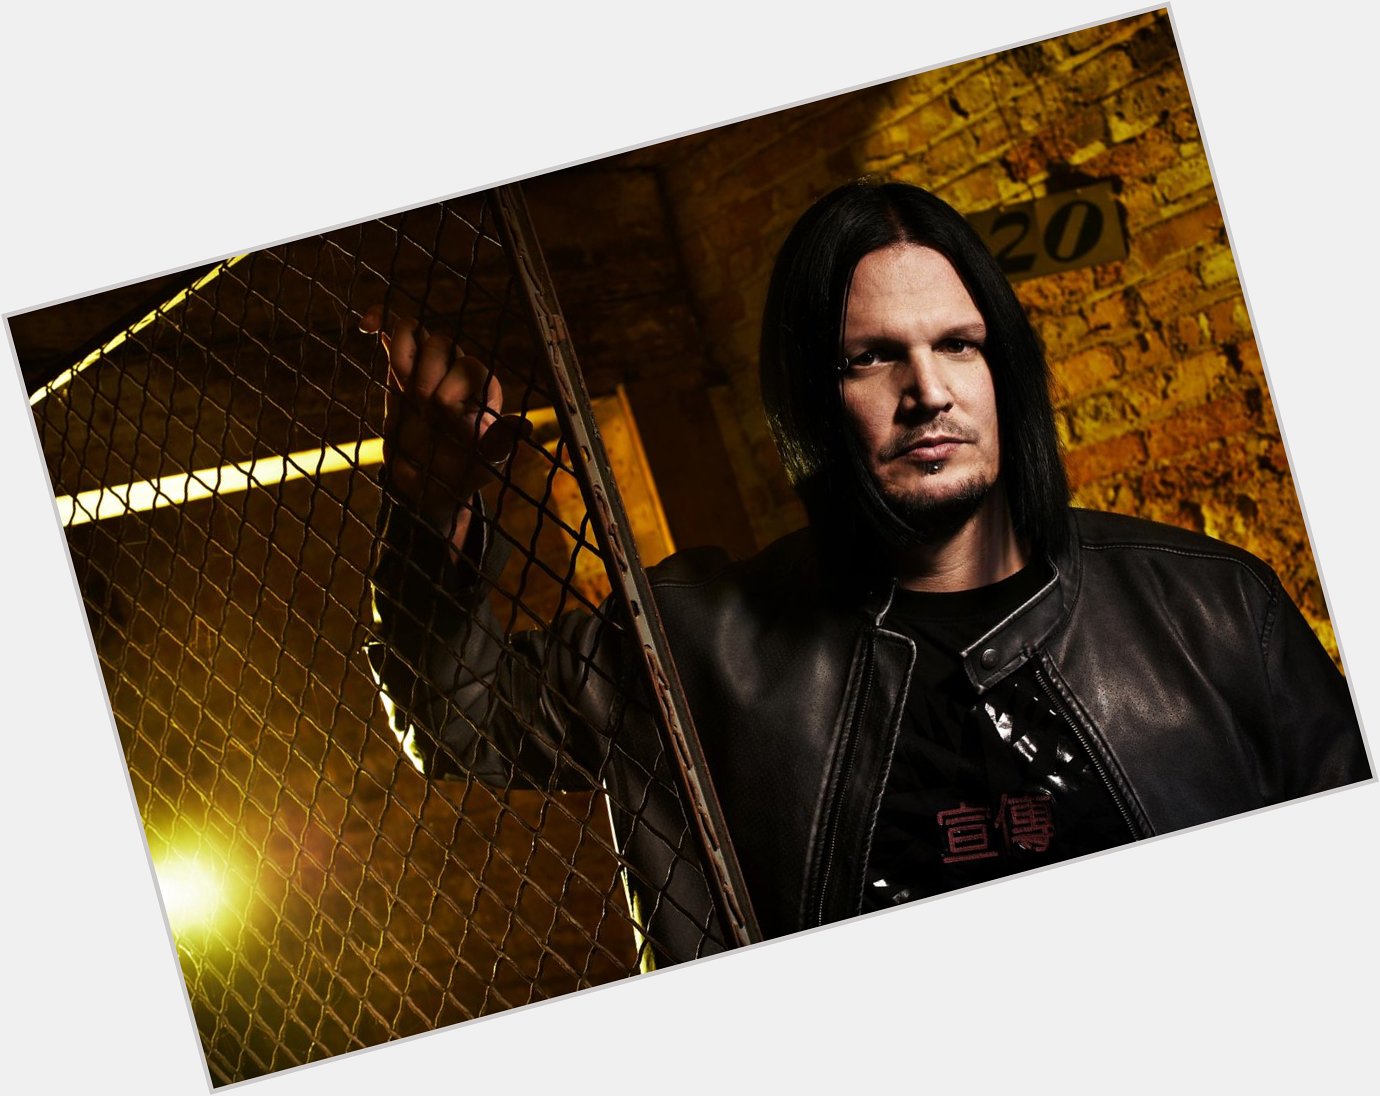 A very happy birthday to Dan Donegan of  